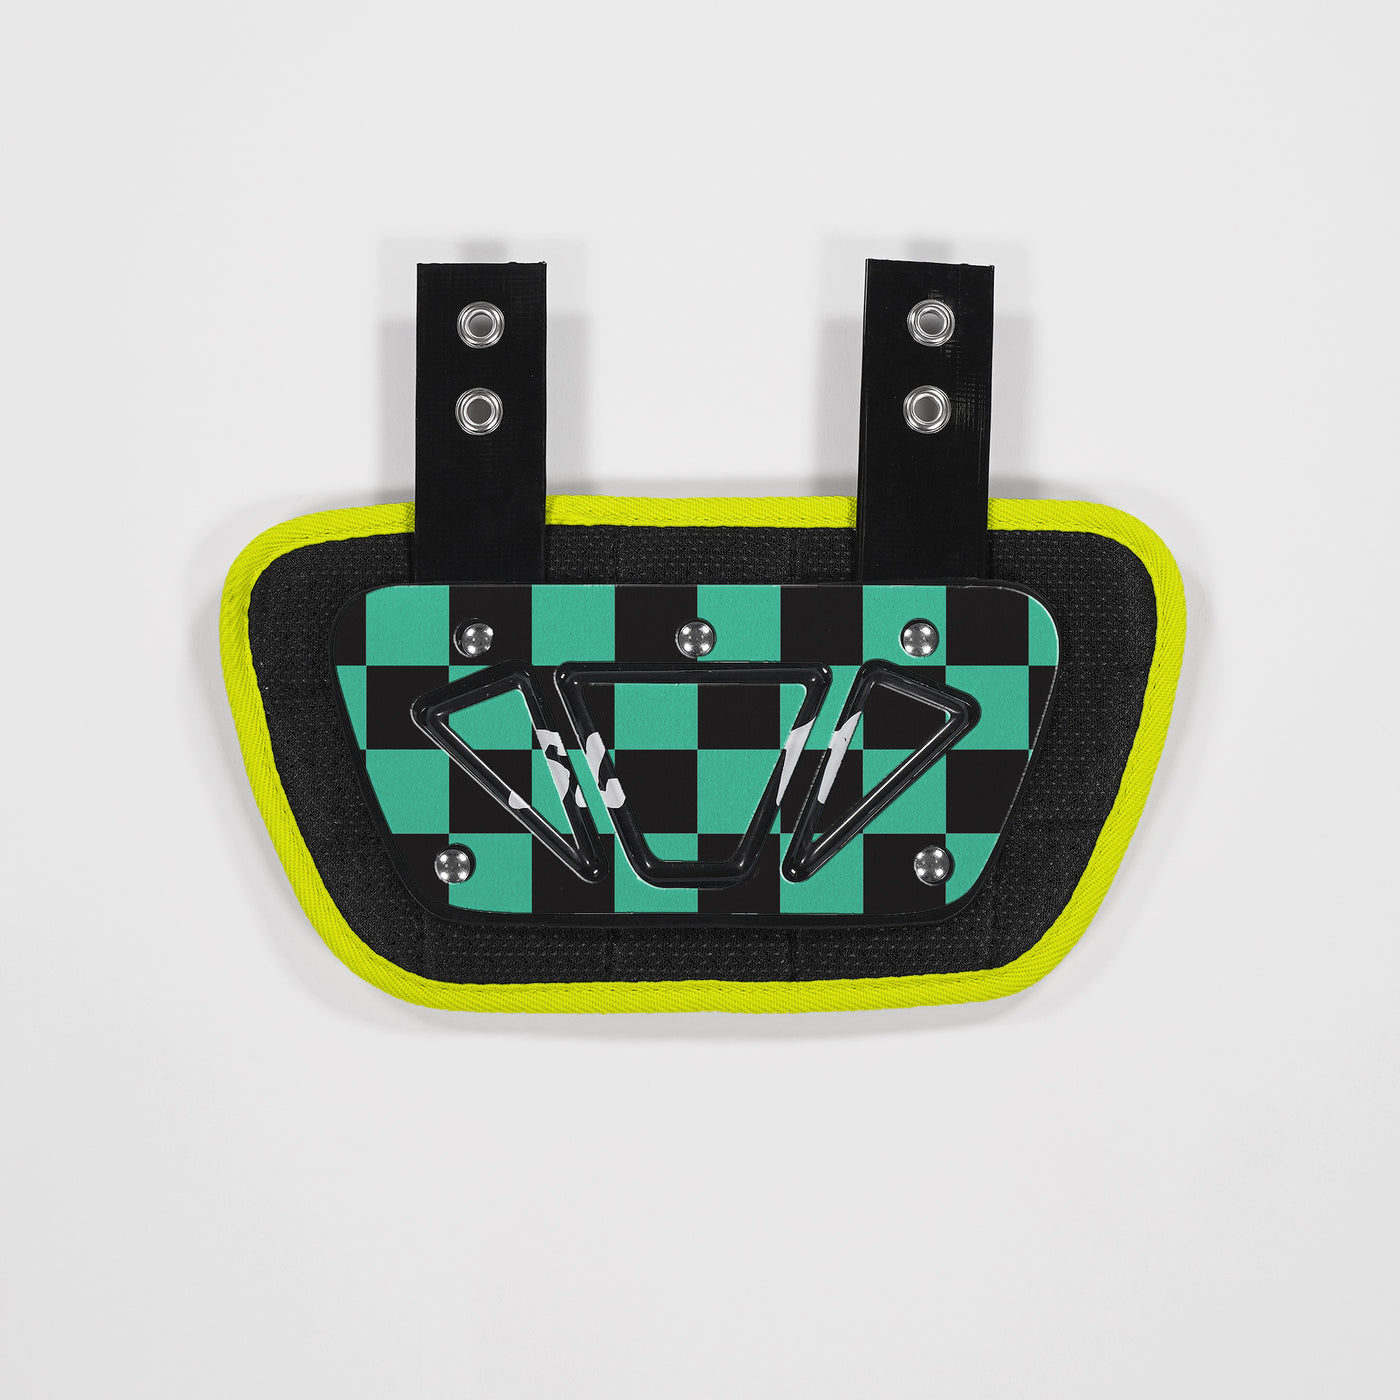 Checkered Teal Black Sticker for Back Plate